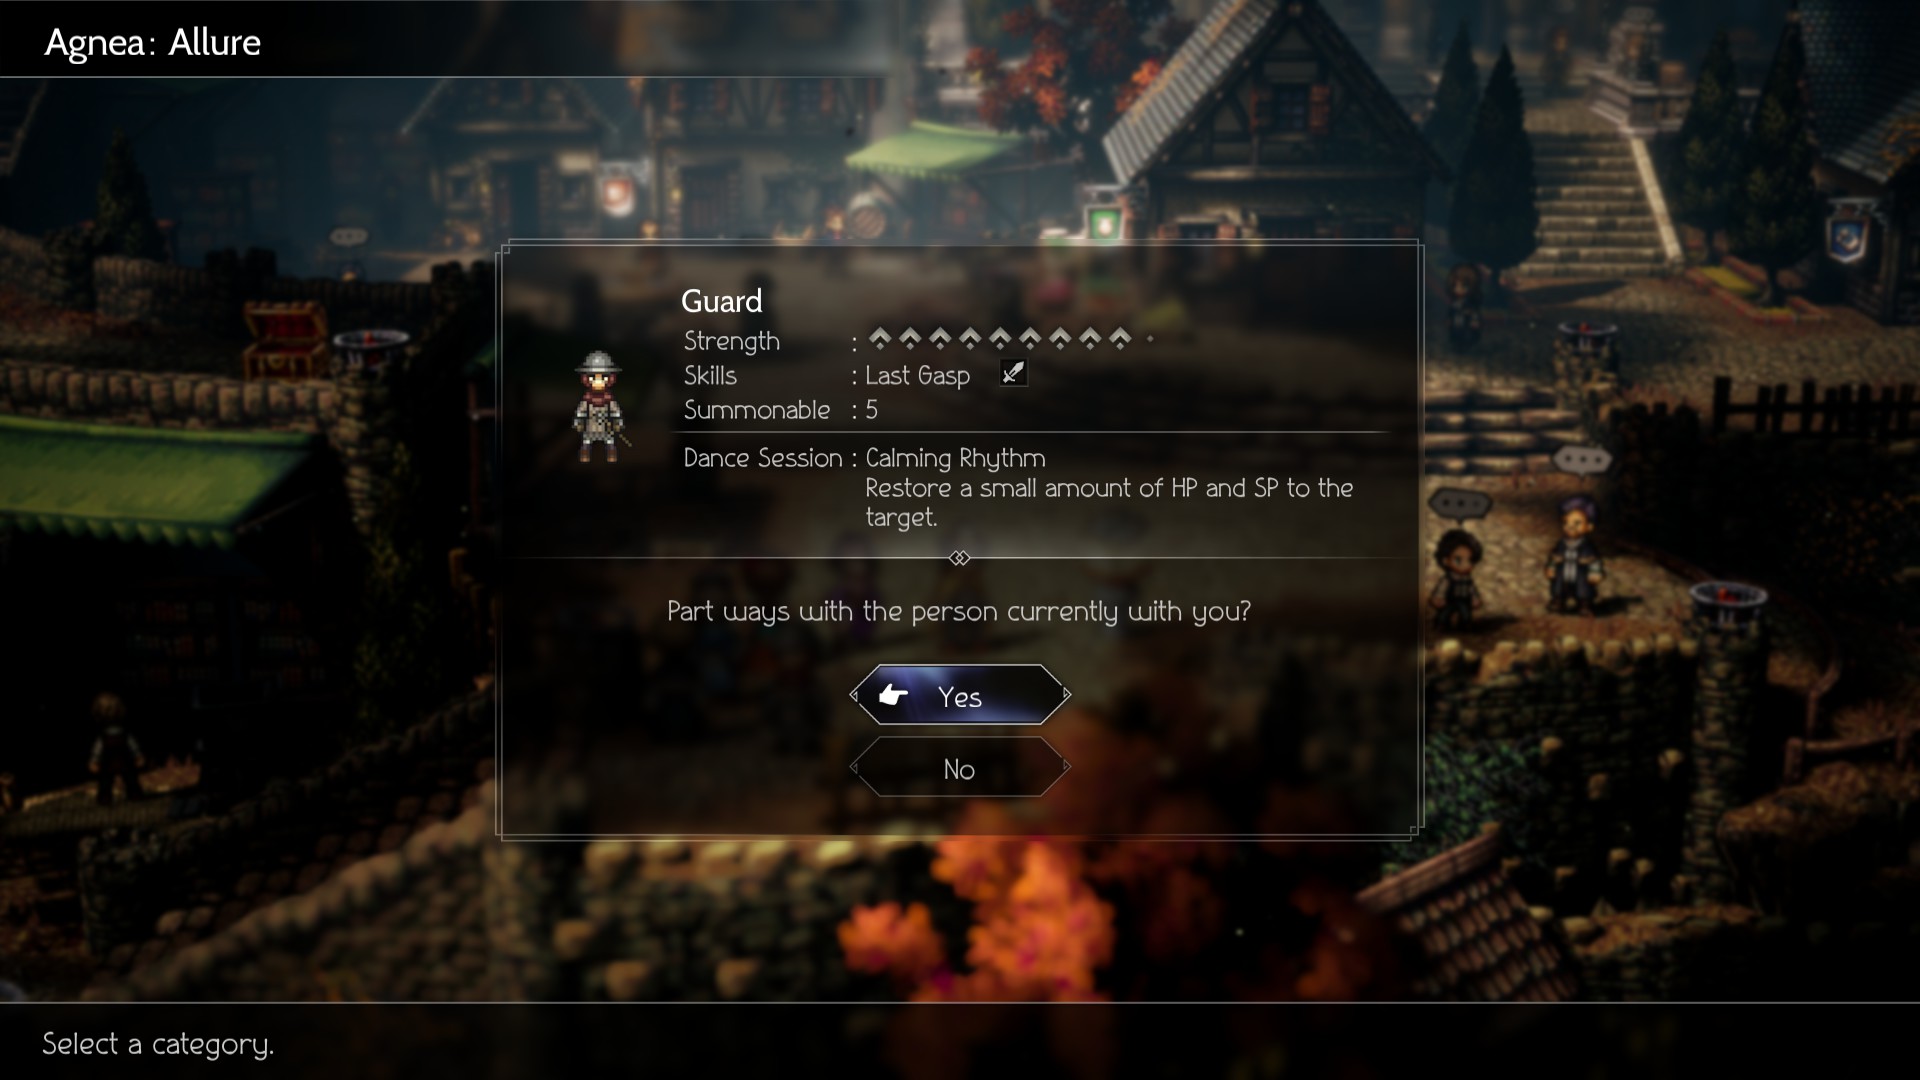 Octopath Traveler 2 – How to complete Reaching for the Stars side story